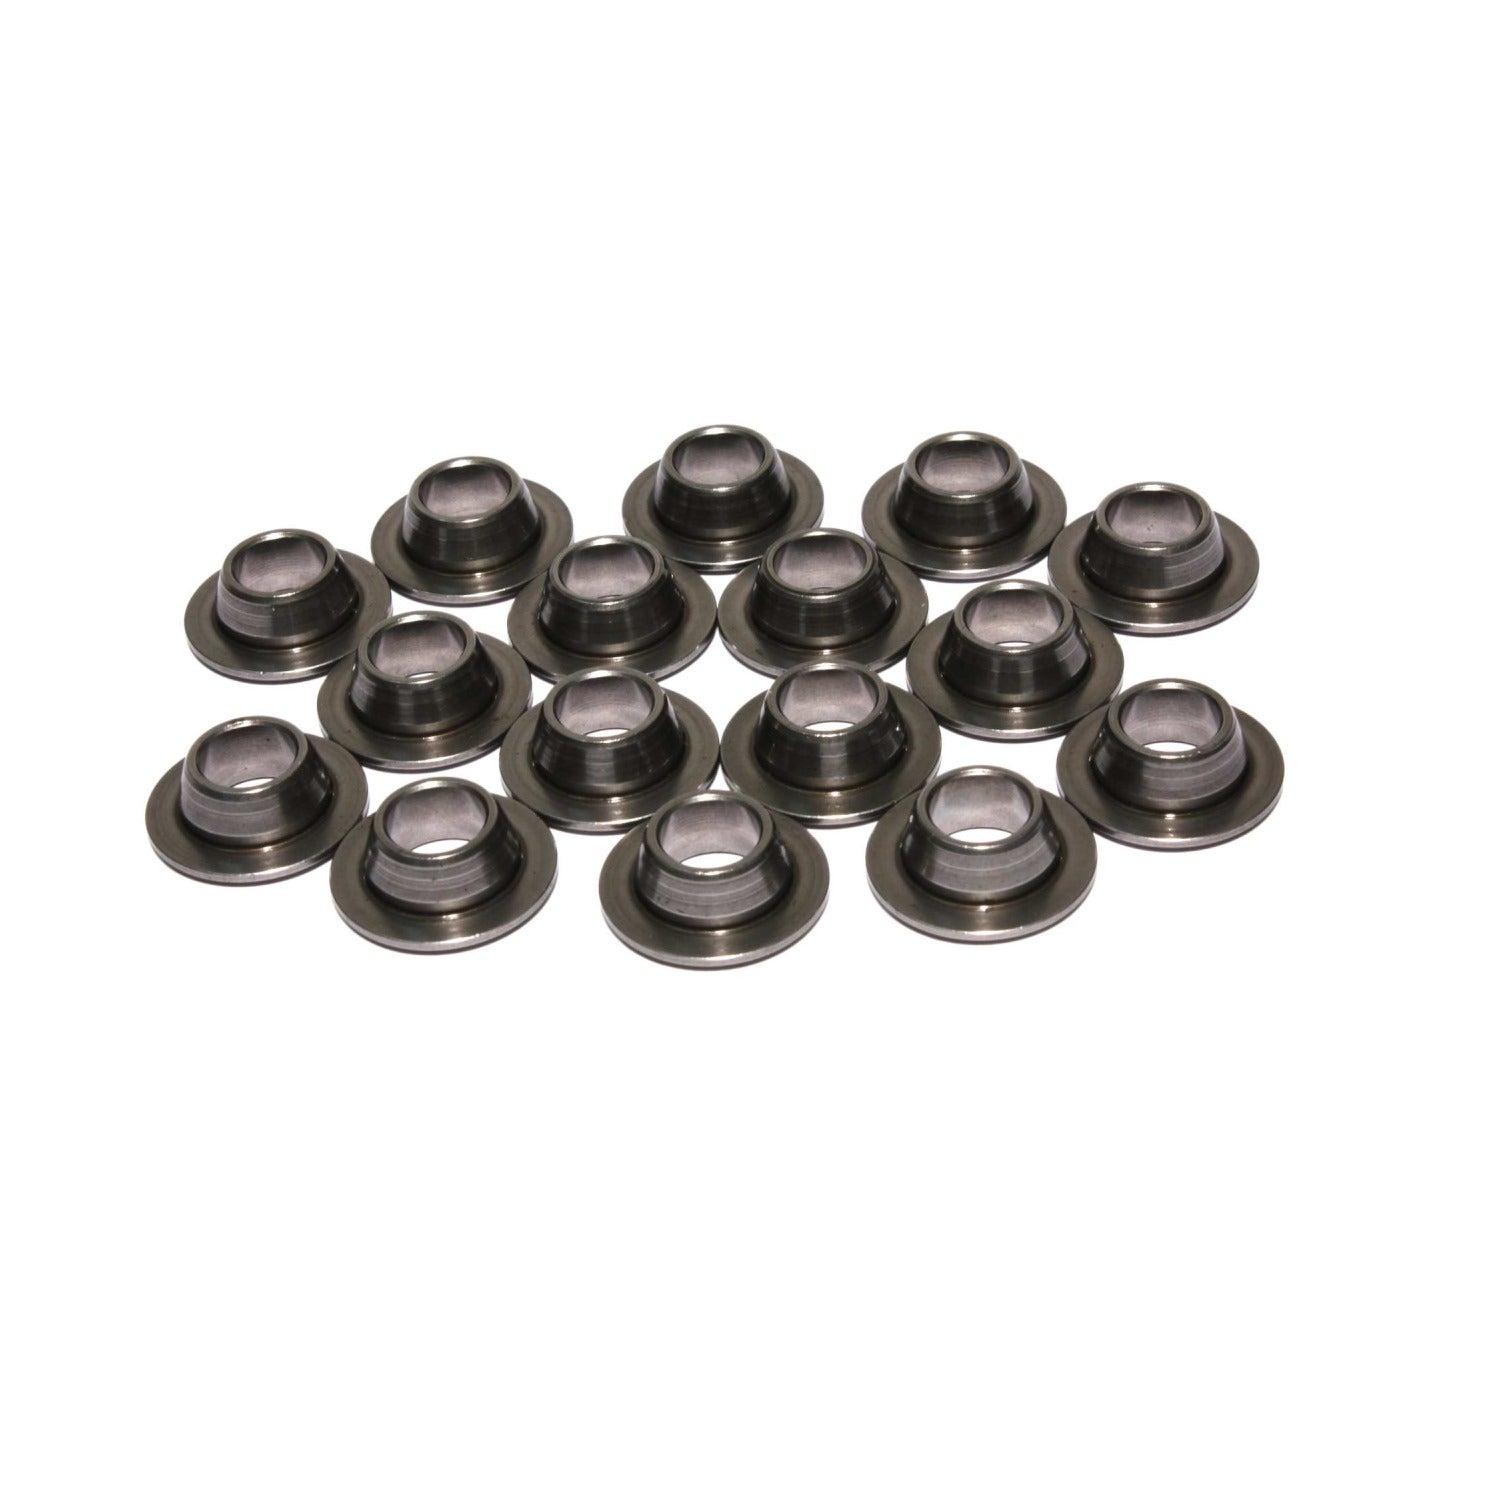 Comp Cams Degree Tool Steel Retainers for 11/32